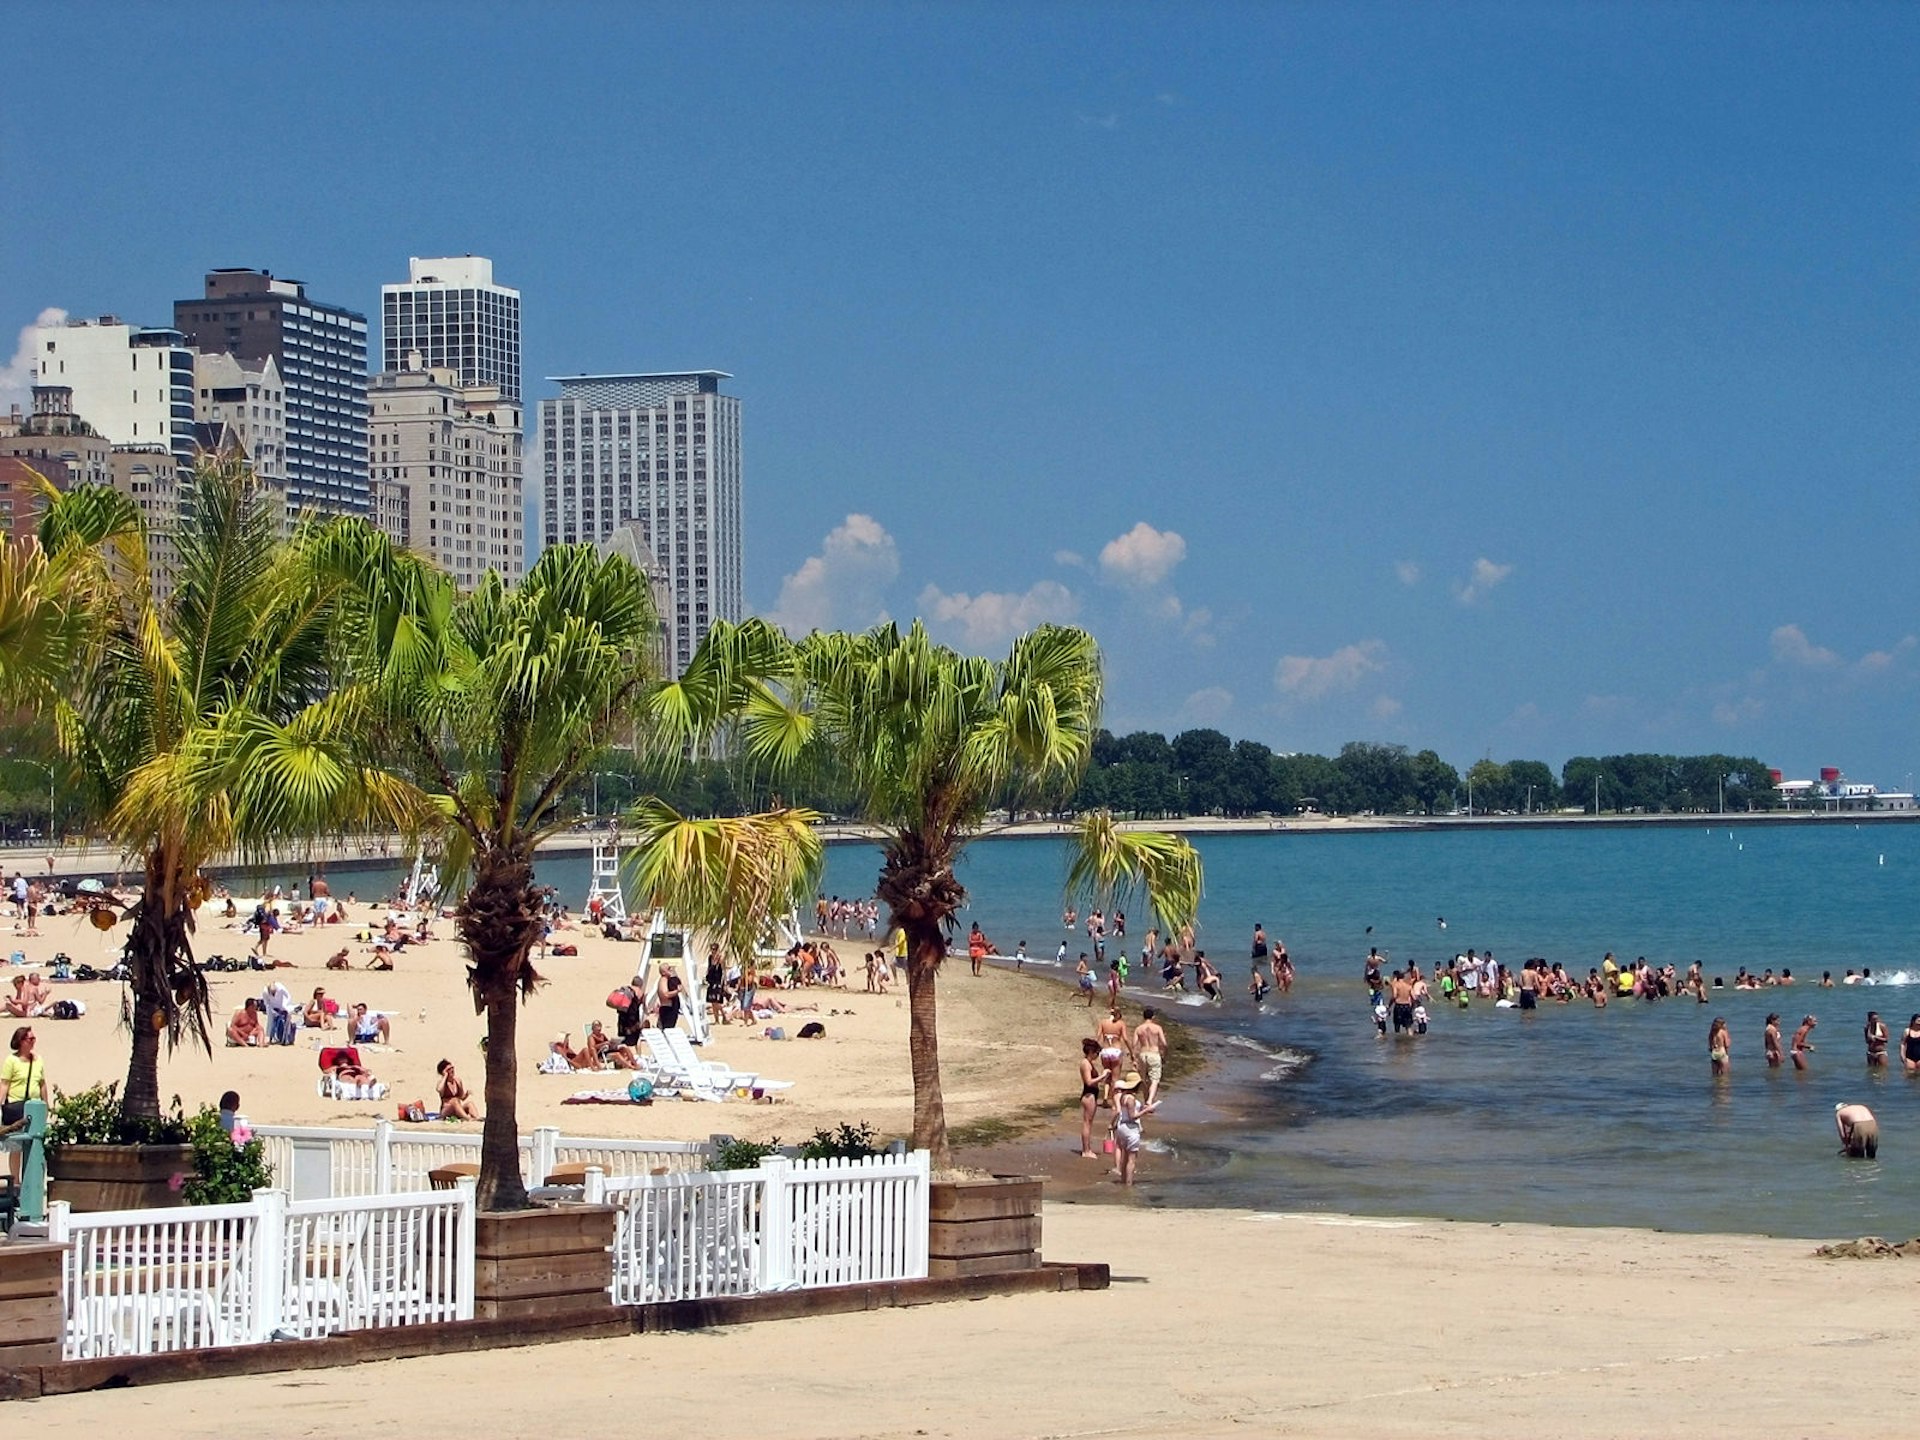 Palm trees lining a sandy stretch of beach. Many people in swimwear are in the water.